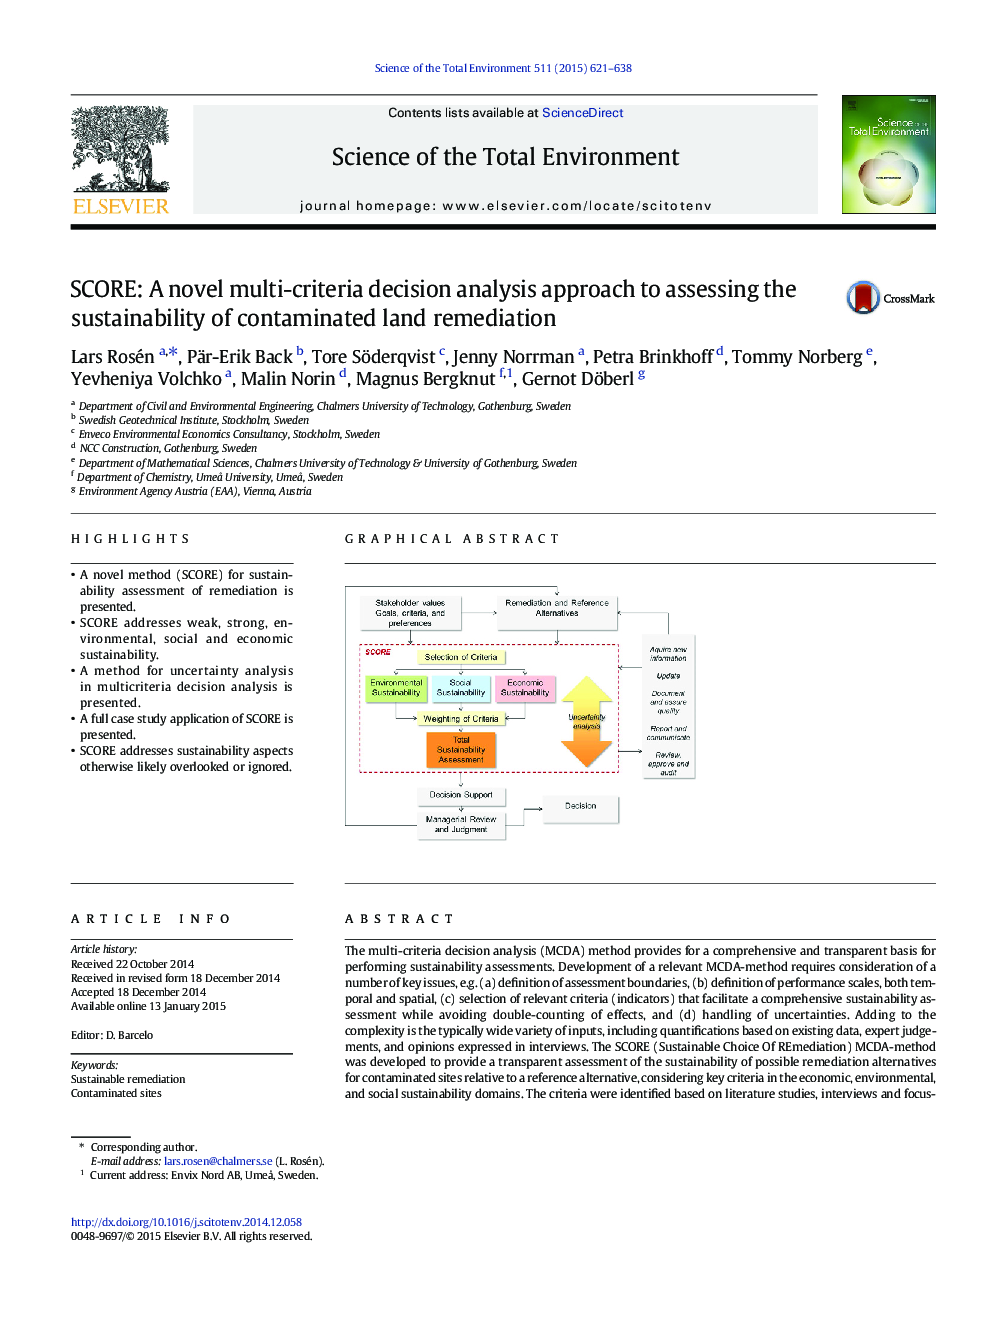 SCORE: A novel multi-criteria decision analysis approach to assessing the sustainability of contaminated land remediation